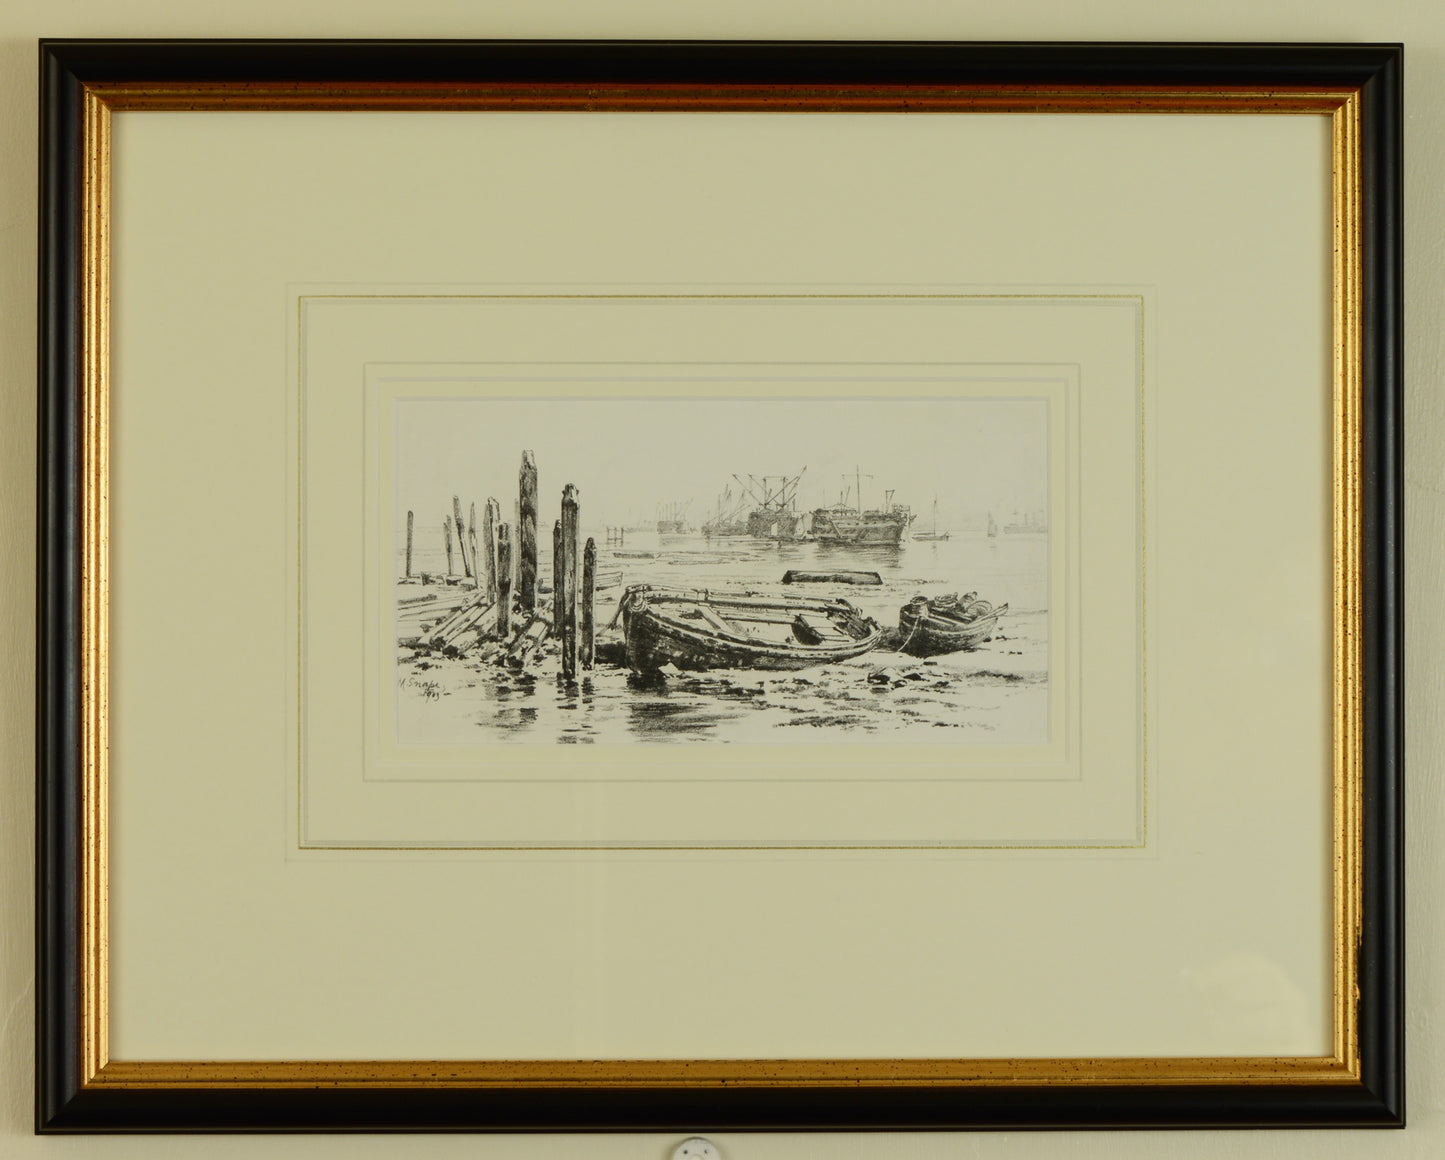 Lithograph of Coldharbour, Gosport by Martin Snape